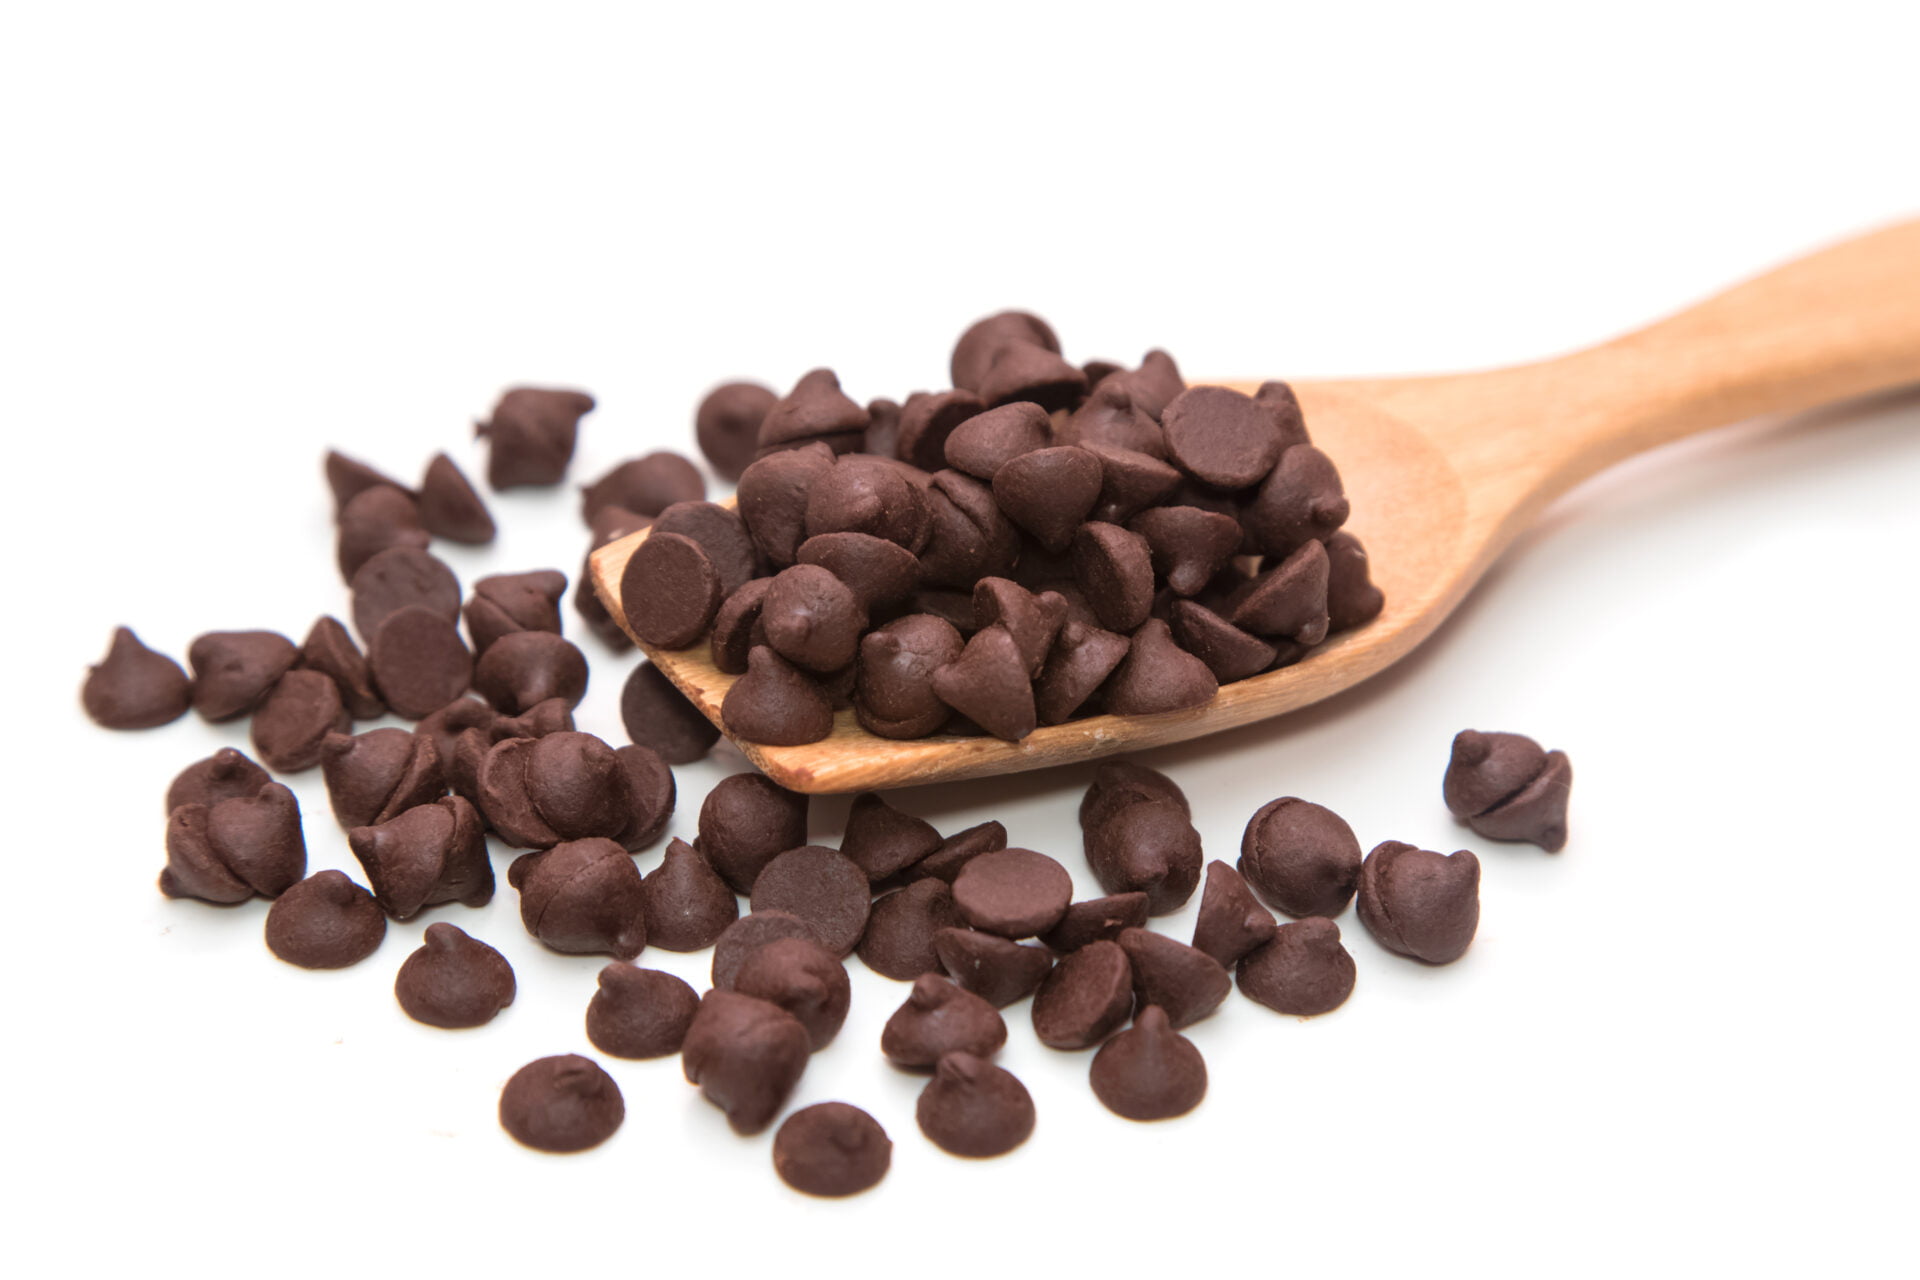 Chocolate chips with low levels of lead and cadmium on a wooden spoon on white background